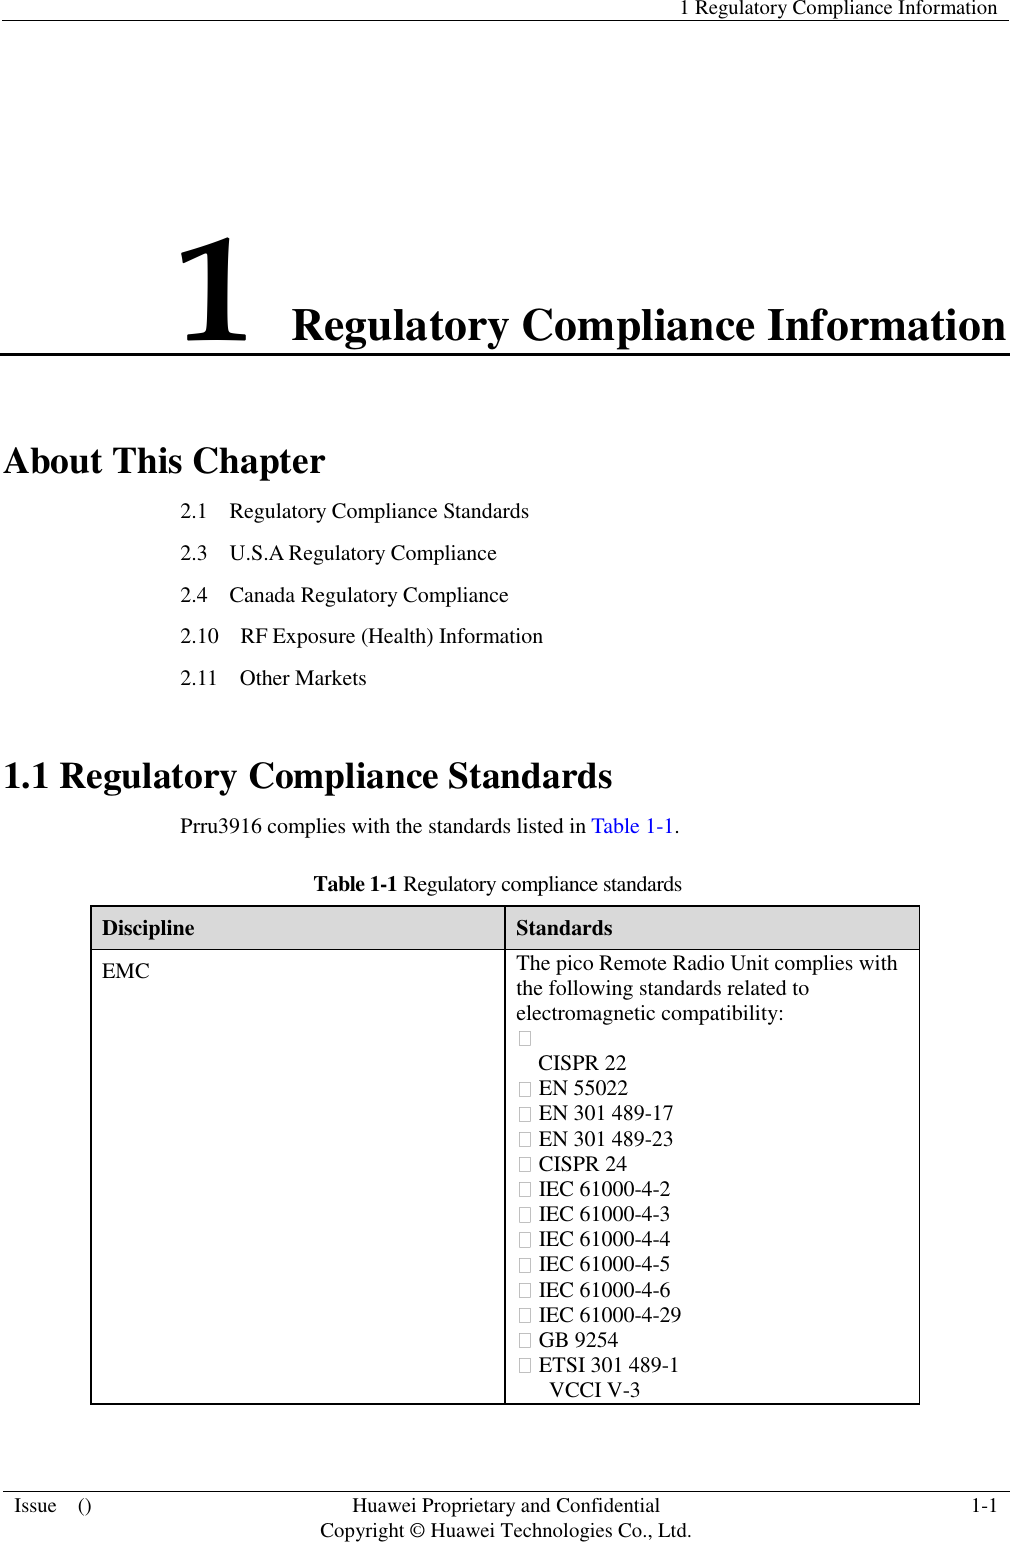   1 Regulatory Compliance Information  Issue    () Huawei Proprietary and Confidential                                     Copyright © Huawei Technologies Co., Ltd. 1-1  1 Regulatory Compliance Information About This Chapter 2.1    Regulatory Compliance Standards 2.3    U.S.A Regulatory Compliance 2.4    Canada Regulatory Compliance 2.10    RF Exposure (Health) Information 2.11    Other Markets 1.1 Regulatory Compliance Standards Prru3916 complies with the standards listed in Table 1-1. Table 1-1 Regulatory compliance standards Discipline Standards EMC The pico Remote Radio Unit complies with the following standards related to electromagnetic compatibility:    CISPR 22    EN 55022    EN 301 489-17    EN 301 489-23    CISPR 24    IEC 61000-4-2    IEC 61000-4-3    IEC 61000-4-4    IEC 61000-4-5    IEC 61000-4-6    IEC 61000-4-29    GB 9254    ETSI 301 489-1   VCCI V-3 